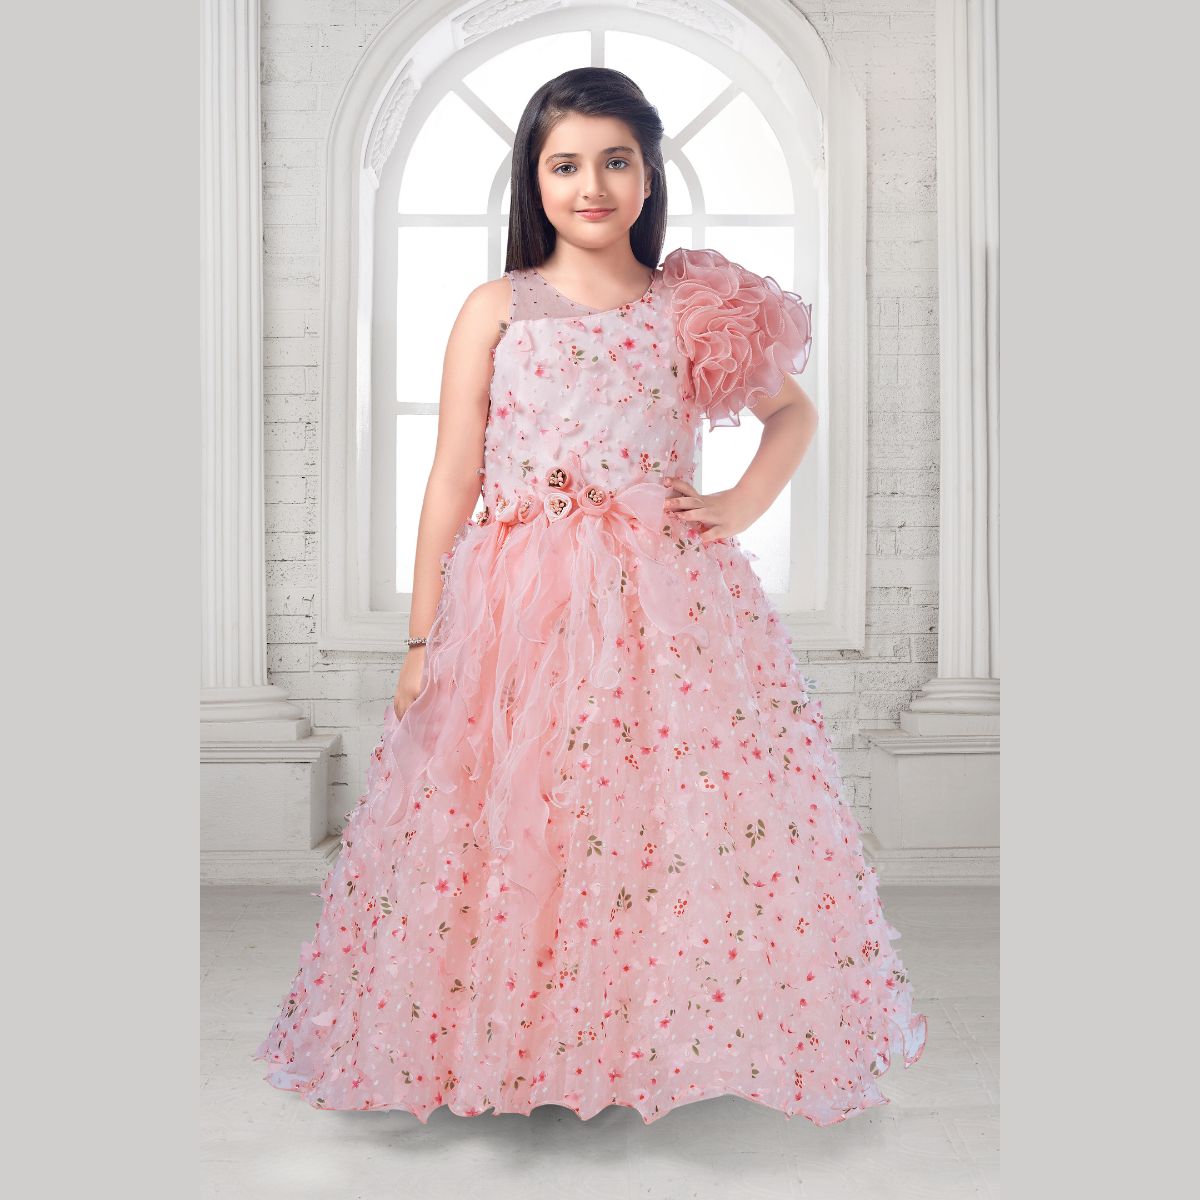 Chiffon - Indian Wedding Gowns Online | Wedding Gowns Online India